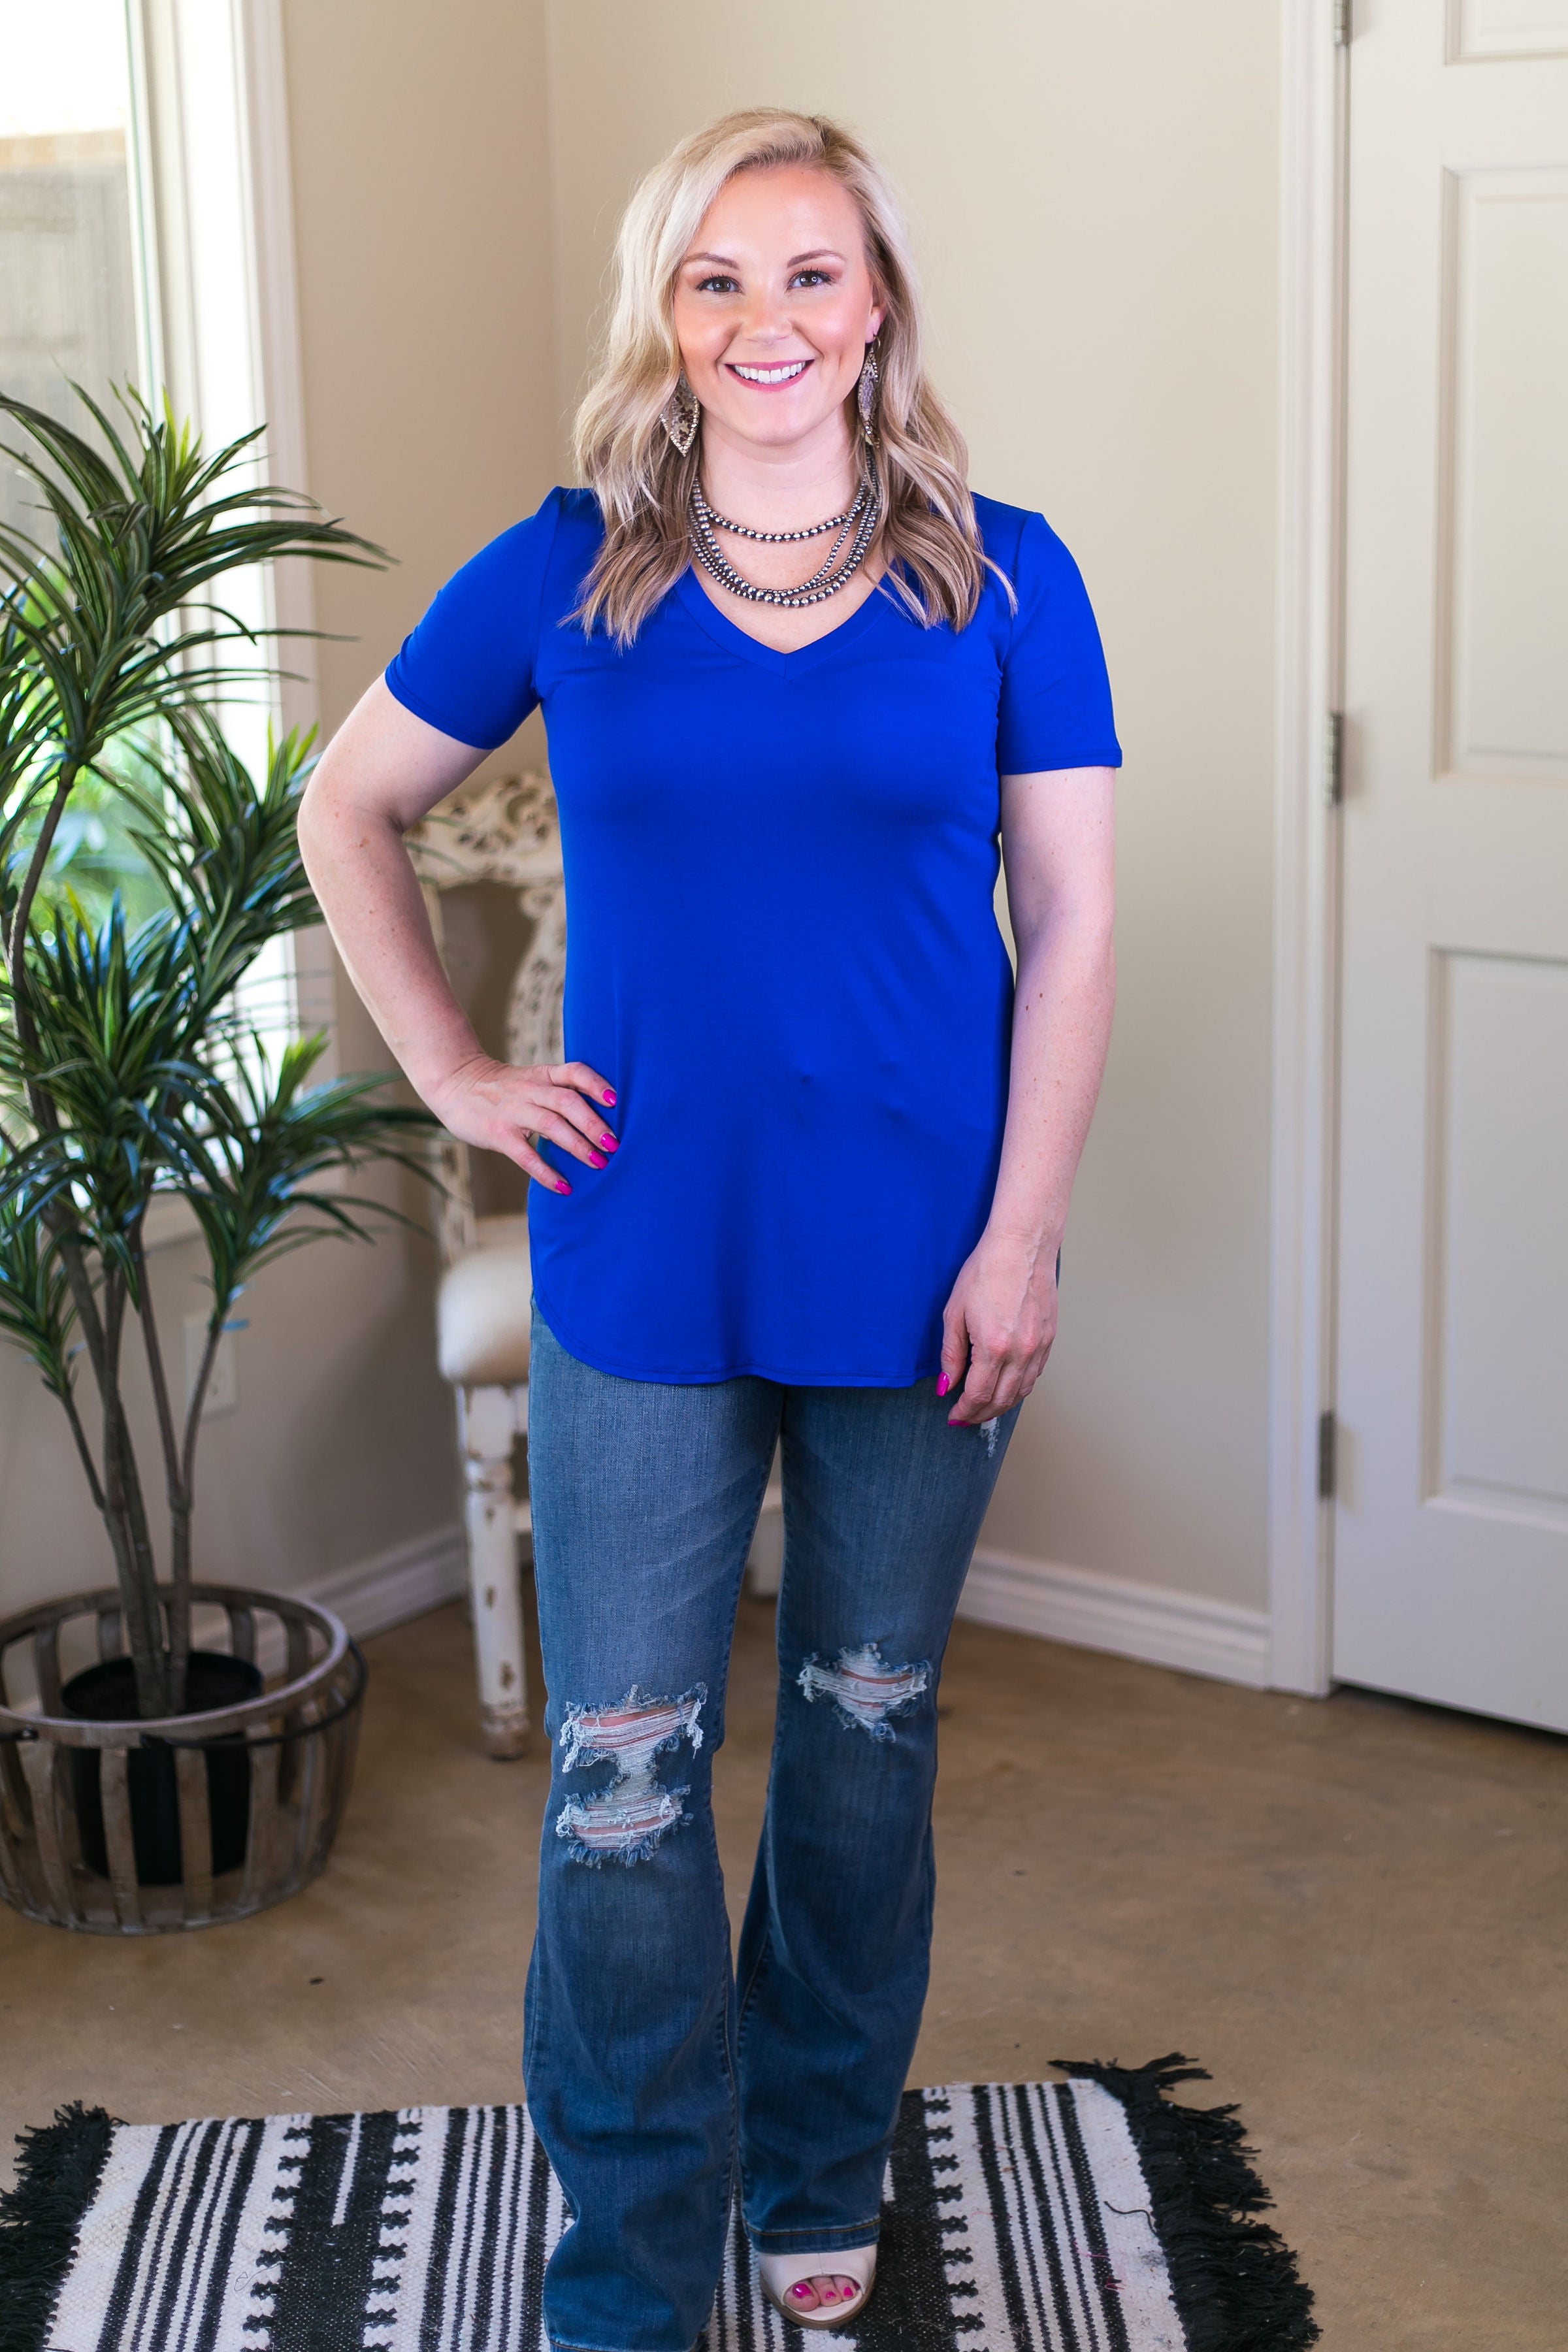 Last Chance Size 3XL | Simply The Best V Neck Short Sleeve Tee Shirt in Royal Blue - Giddy Up Glamour Boutique